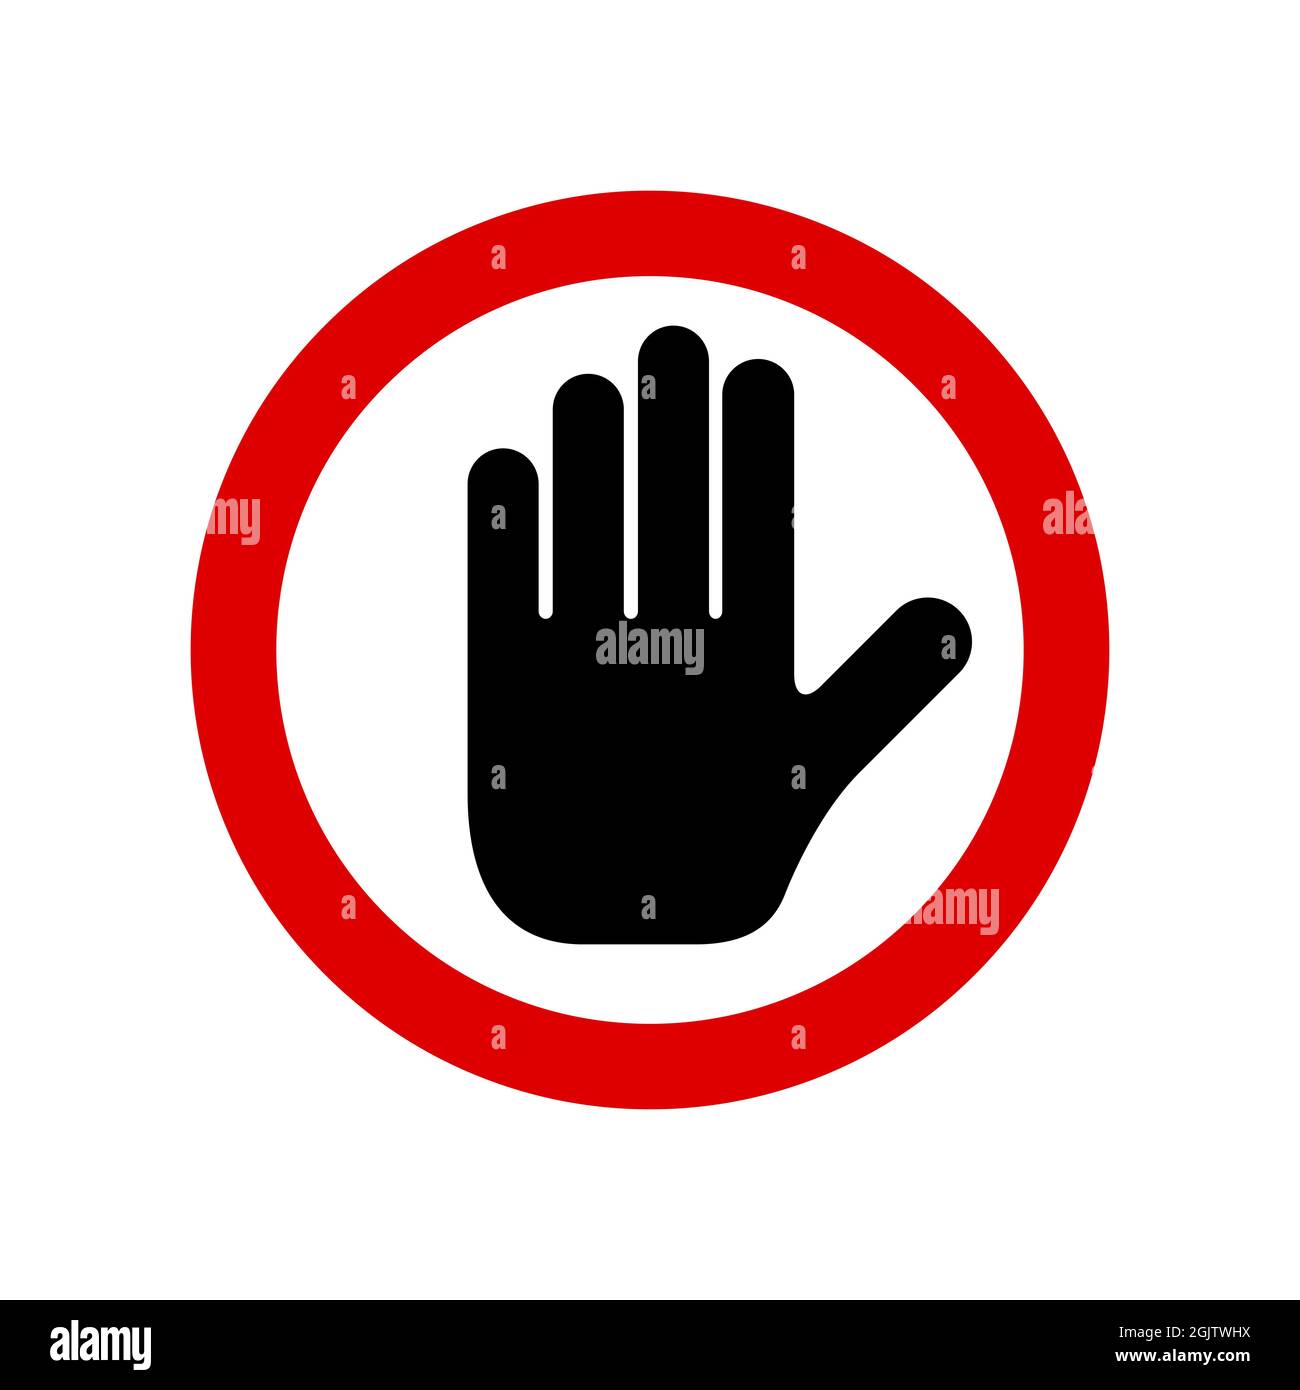 Black hand prohibition sign. Stop sign push icon. Black hand in a red circle. No symbol, halt gesture, do not sign, nay, prohibited symbol, dont do it Stock Photo